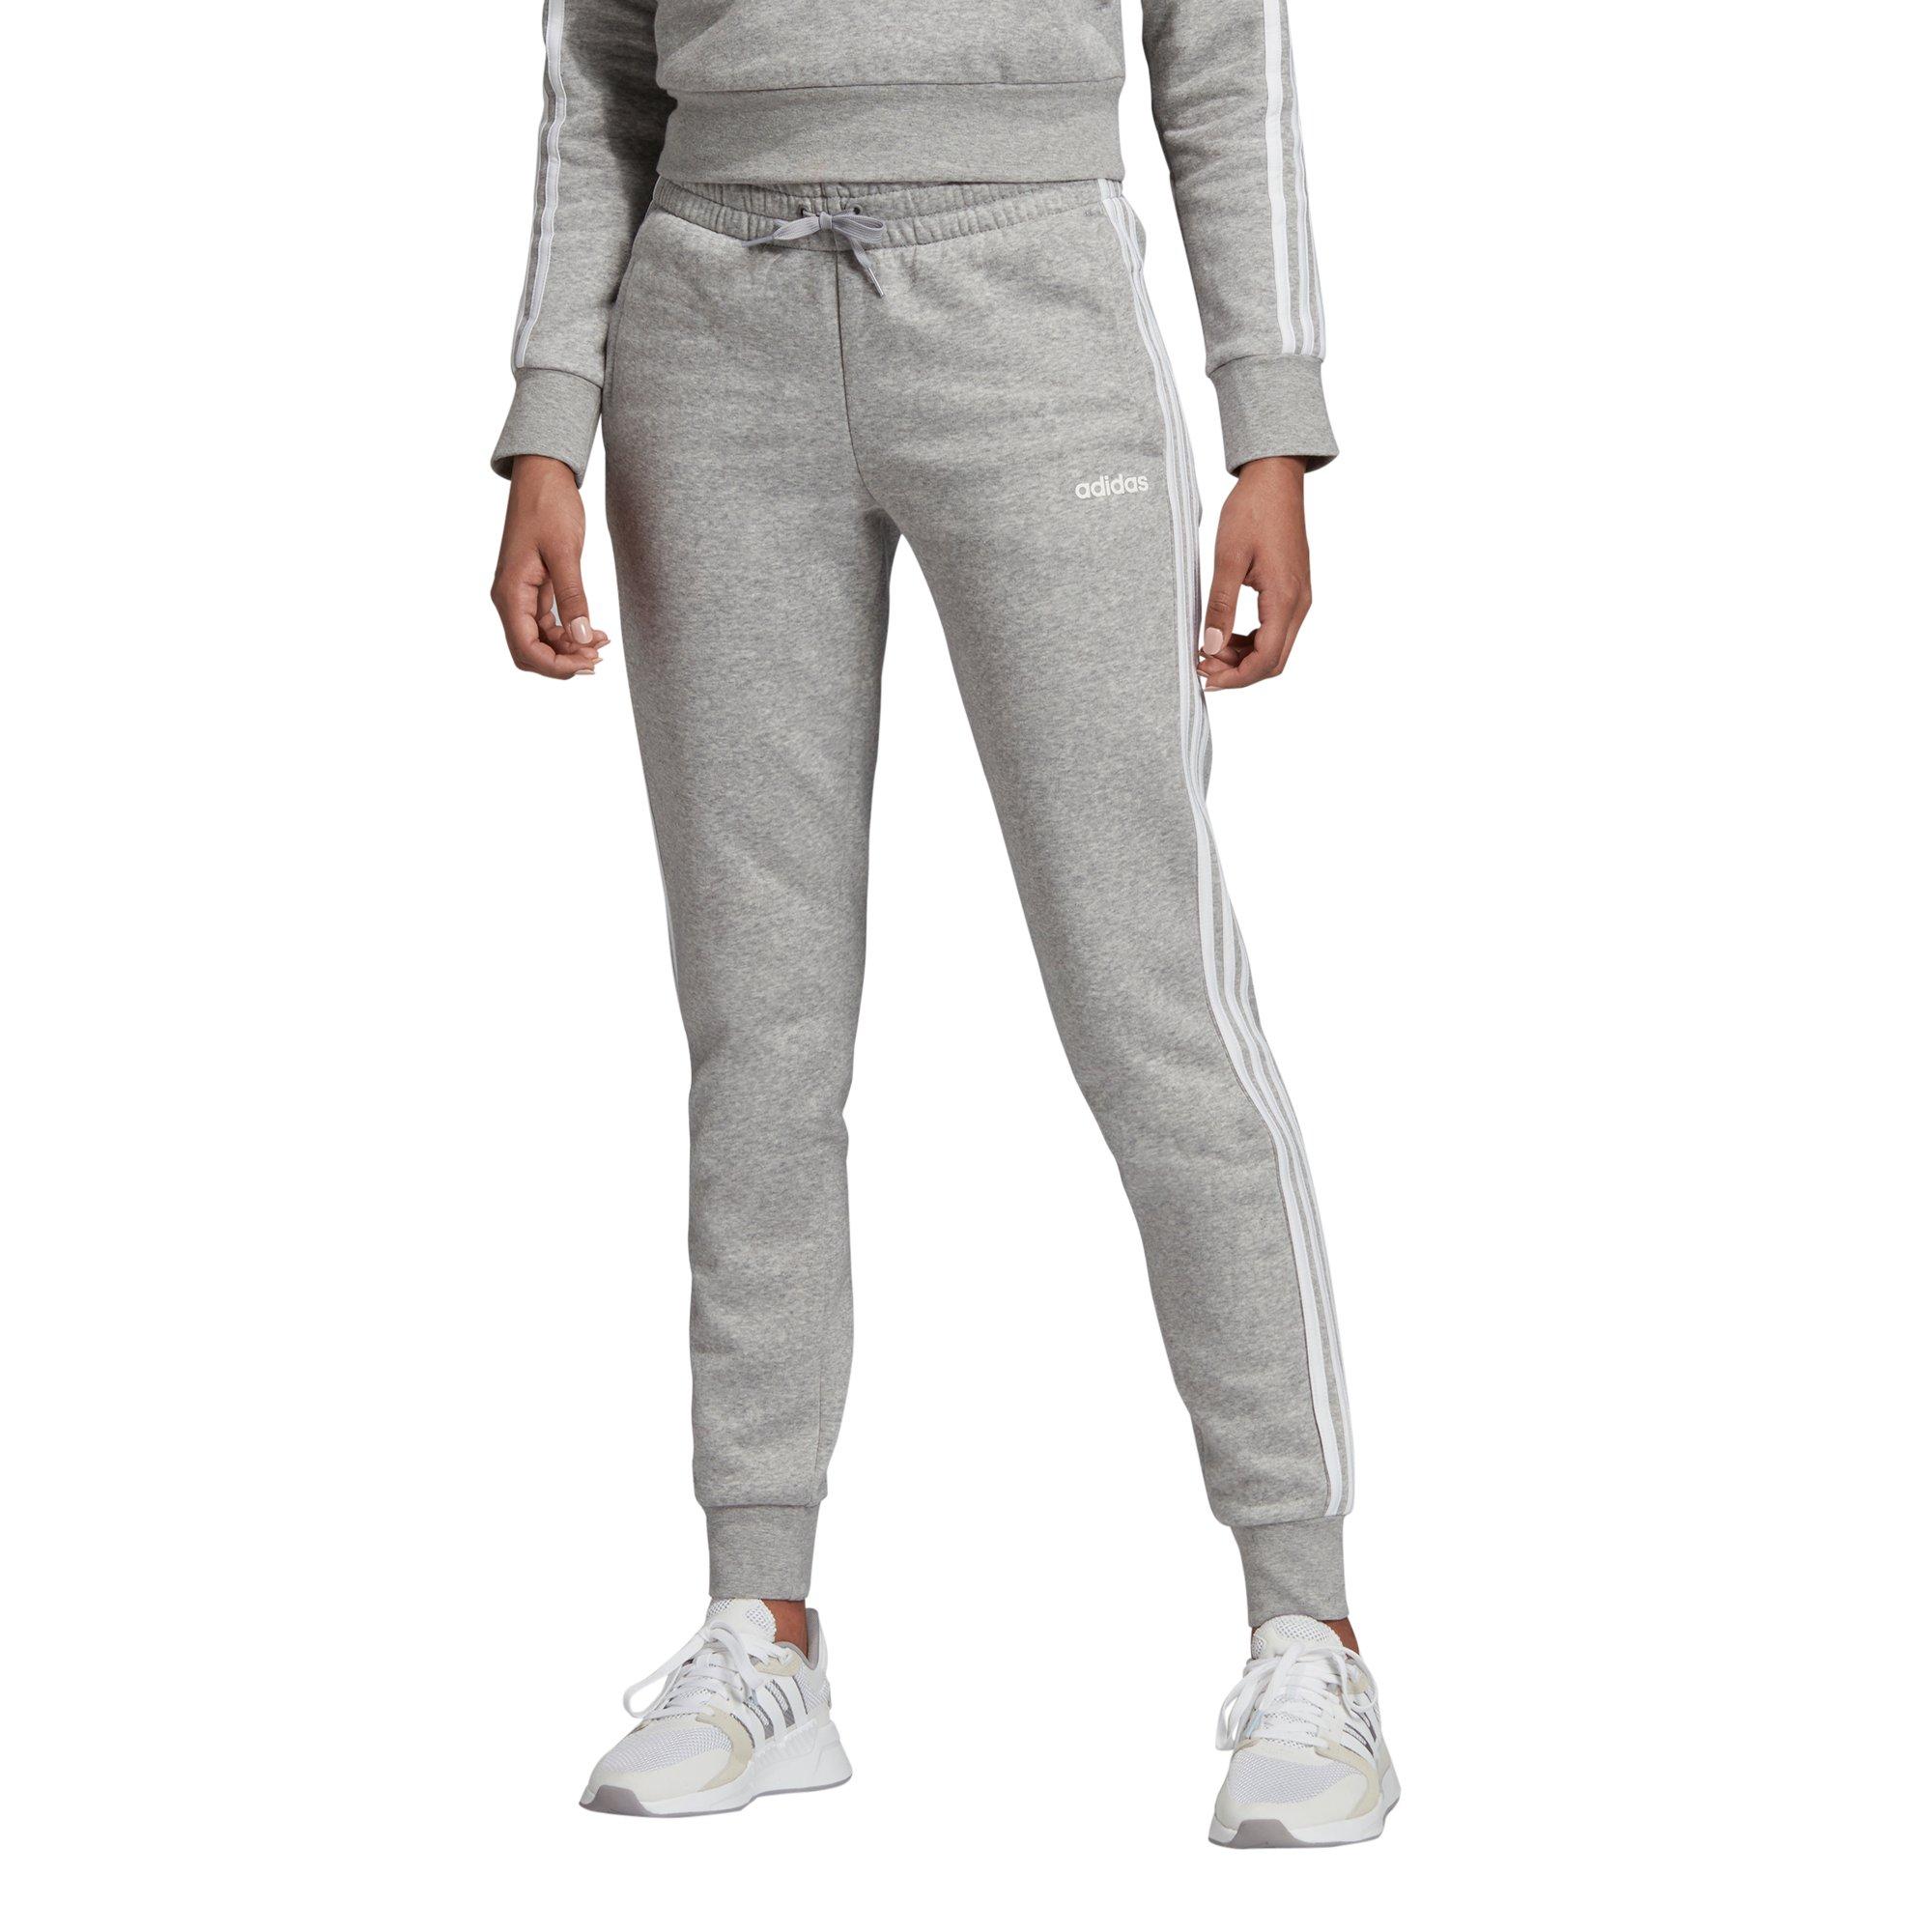 adidas womens sweat outfits